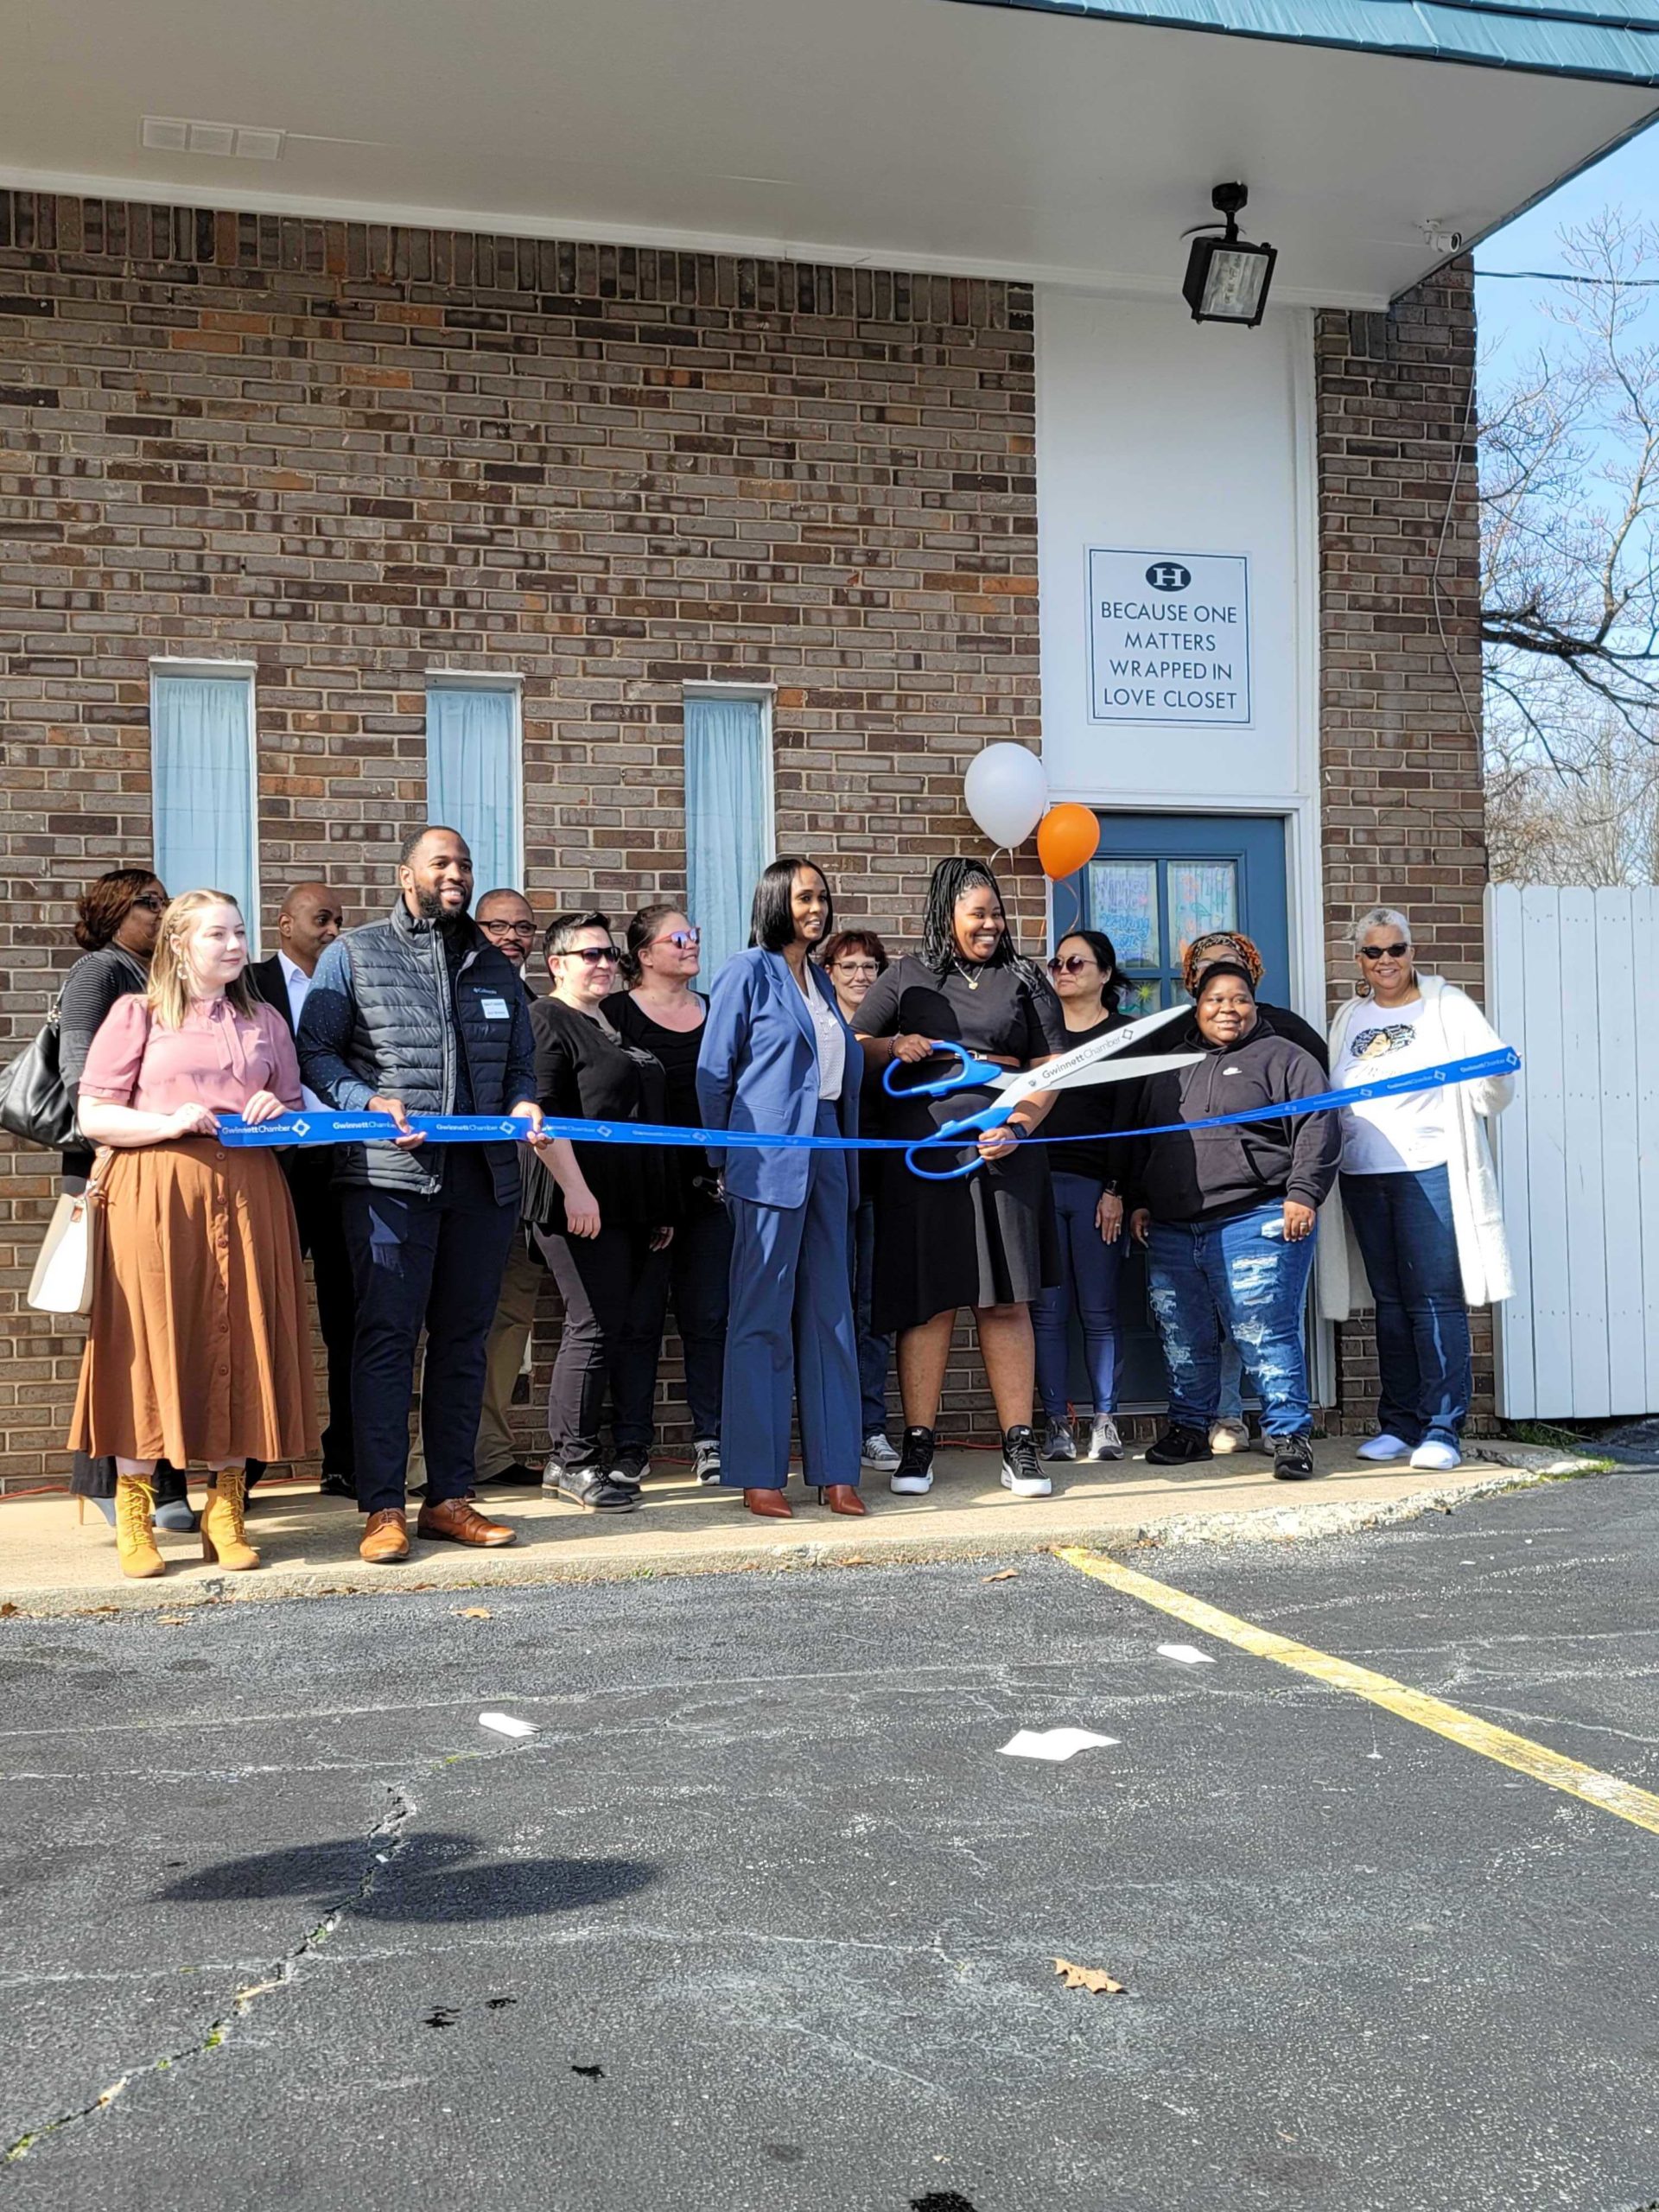 Because One Matters opens clothing wrapped in love closet in Lawrenceville